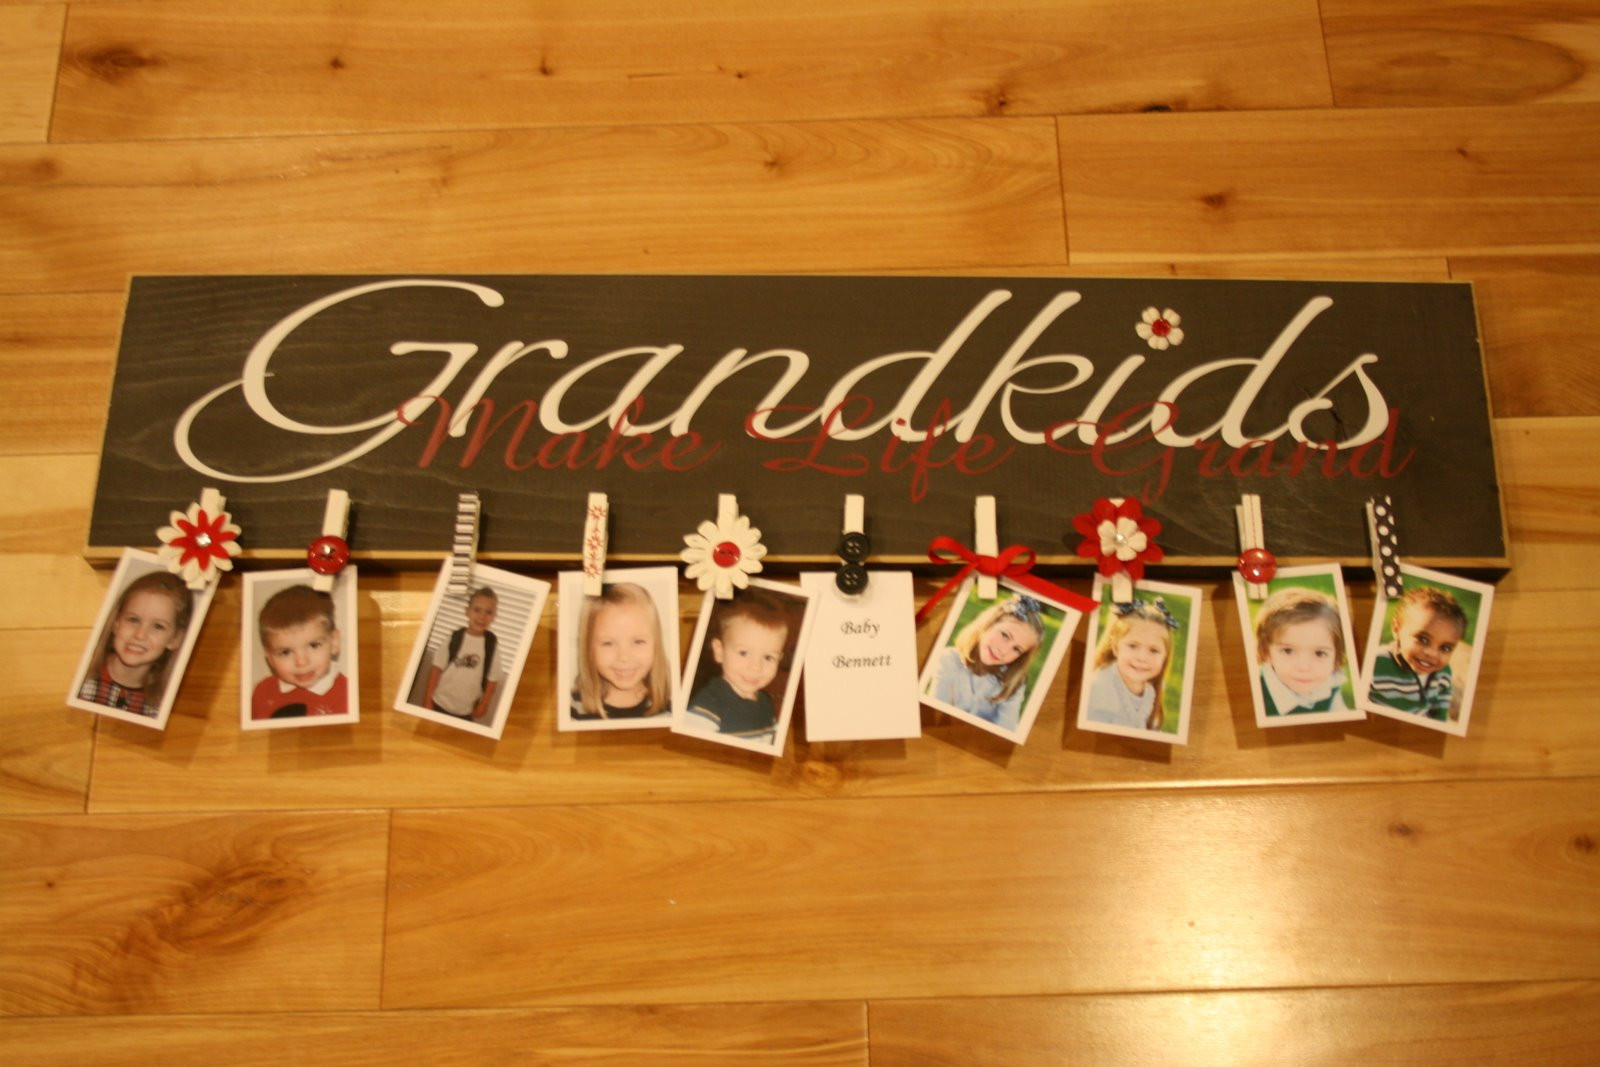 Gift Ideas Grandmother
 8 of my favorite Gift Ideas for Grandma for Mothers Day